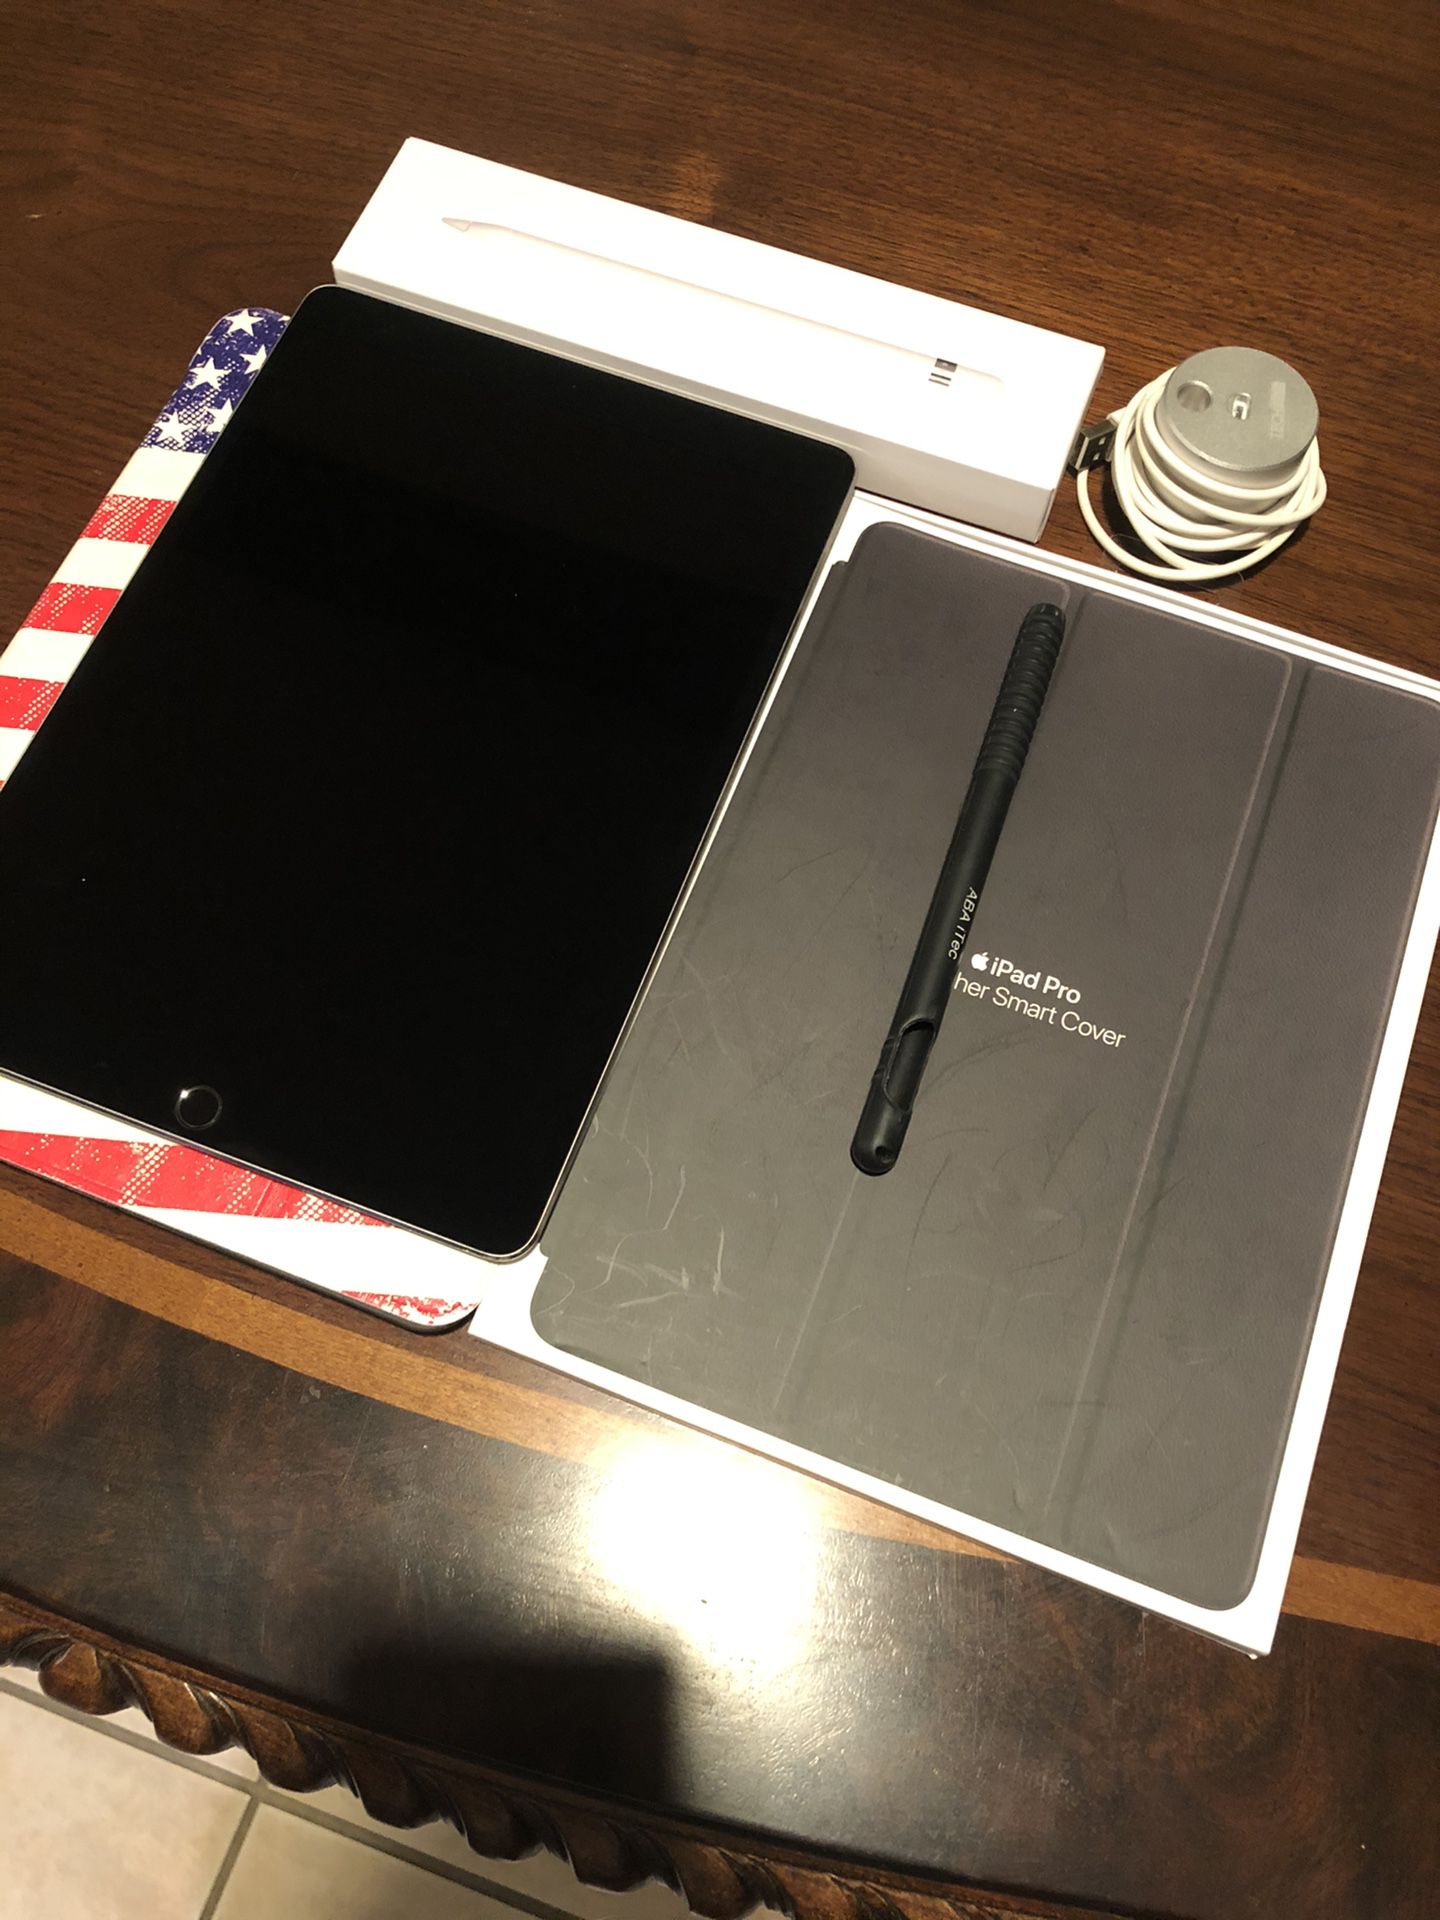 iPad Pro 10.5 inches, 64GB (BUNDLE Package)